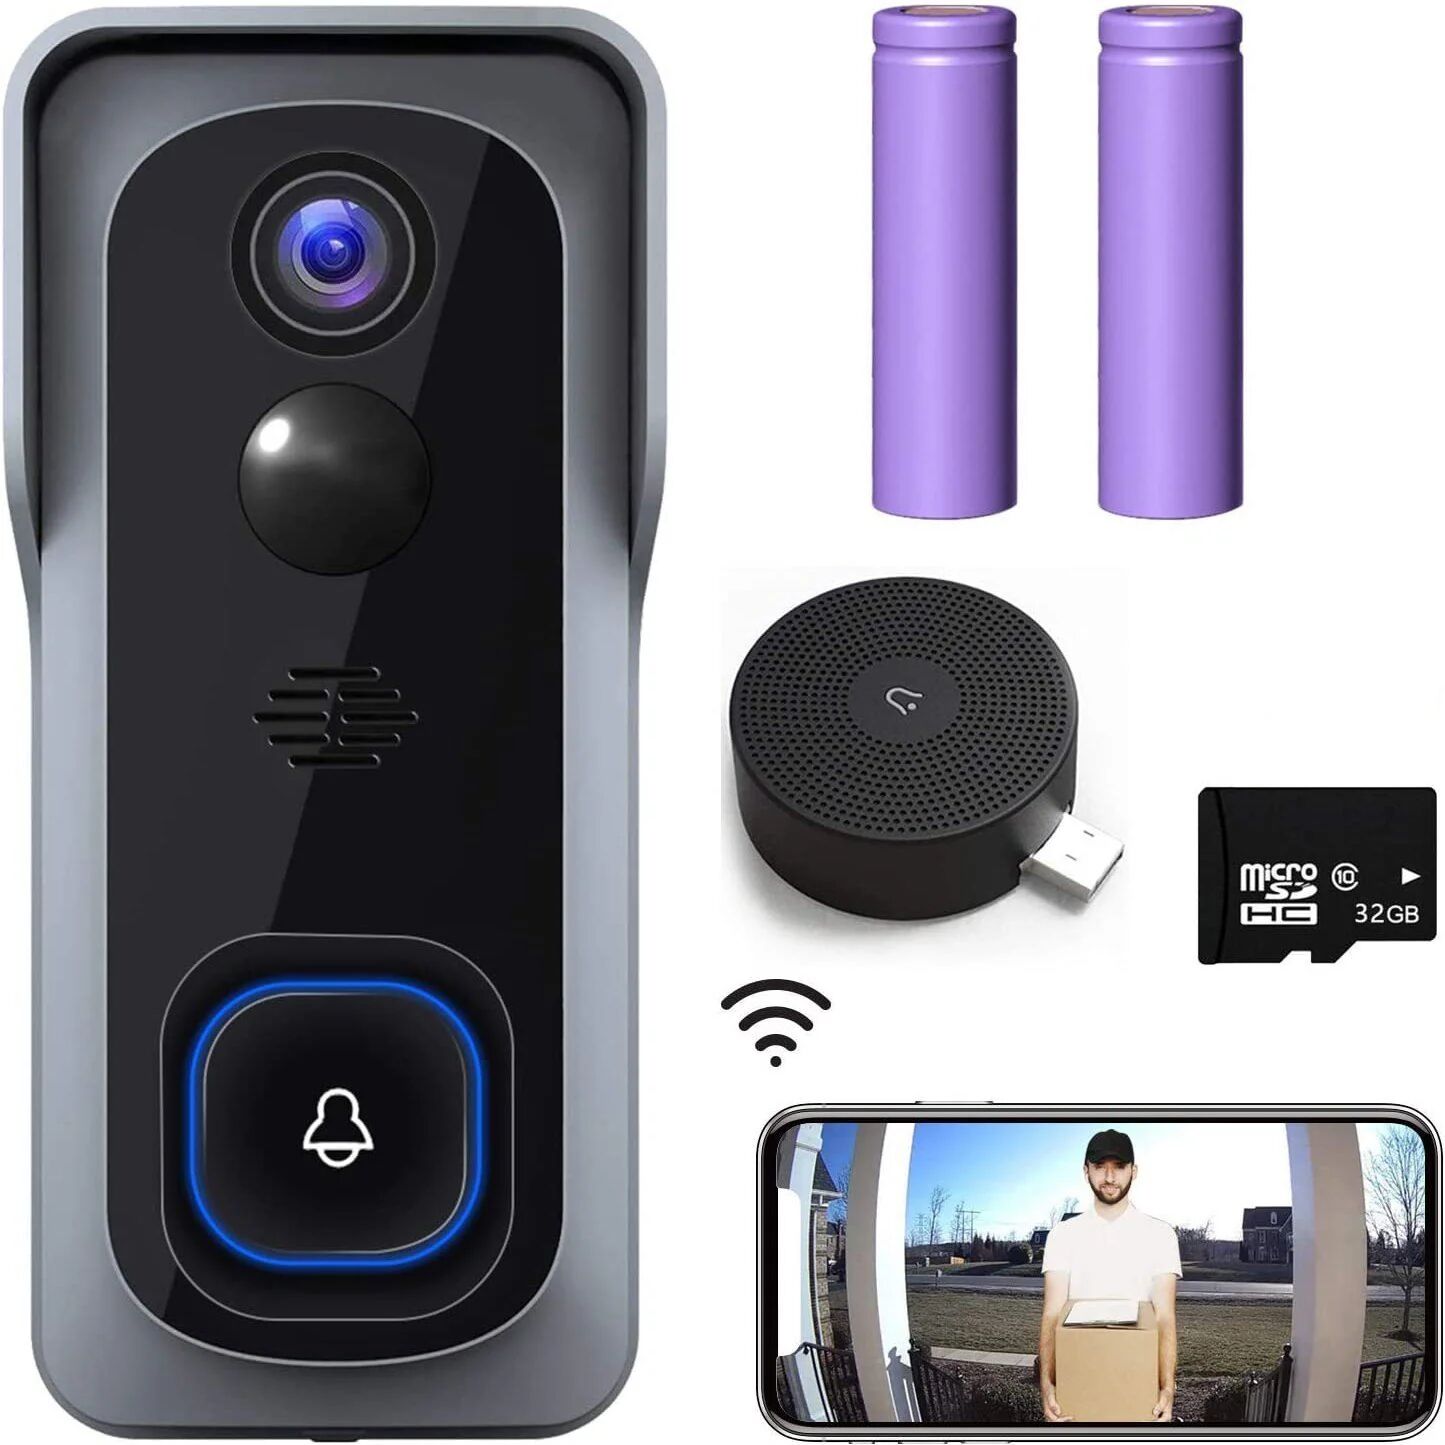 DailySale WiFi Video Doorbell Camera with Chime